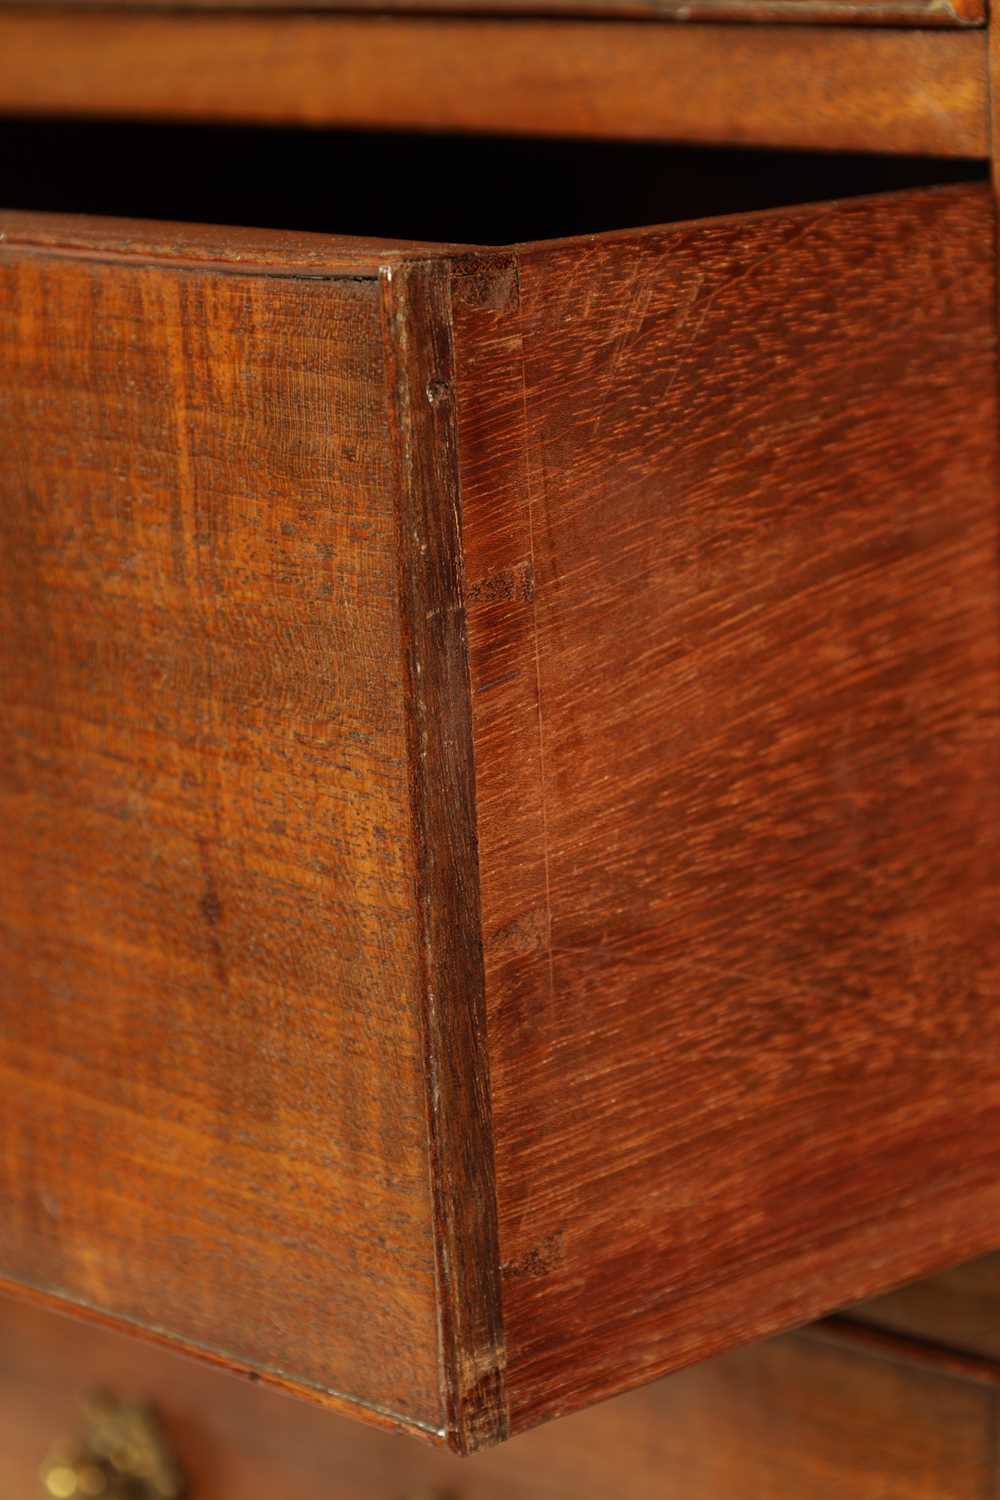 A RARE GEORGE III MAHOGANY LIBRARY SECRETAIRE CHEST OF DRAWERS WITH DETACHABLE BOOK CARRIER - Image 8 of 16